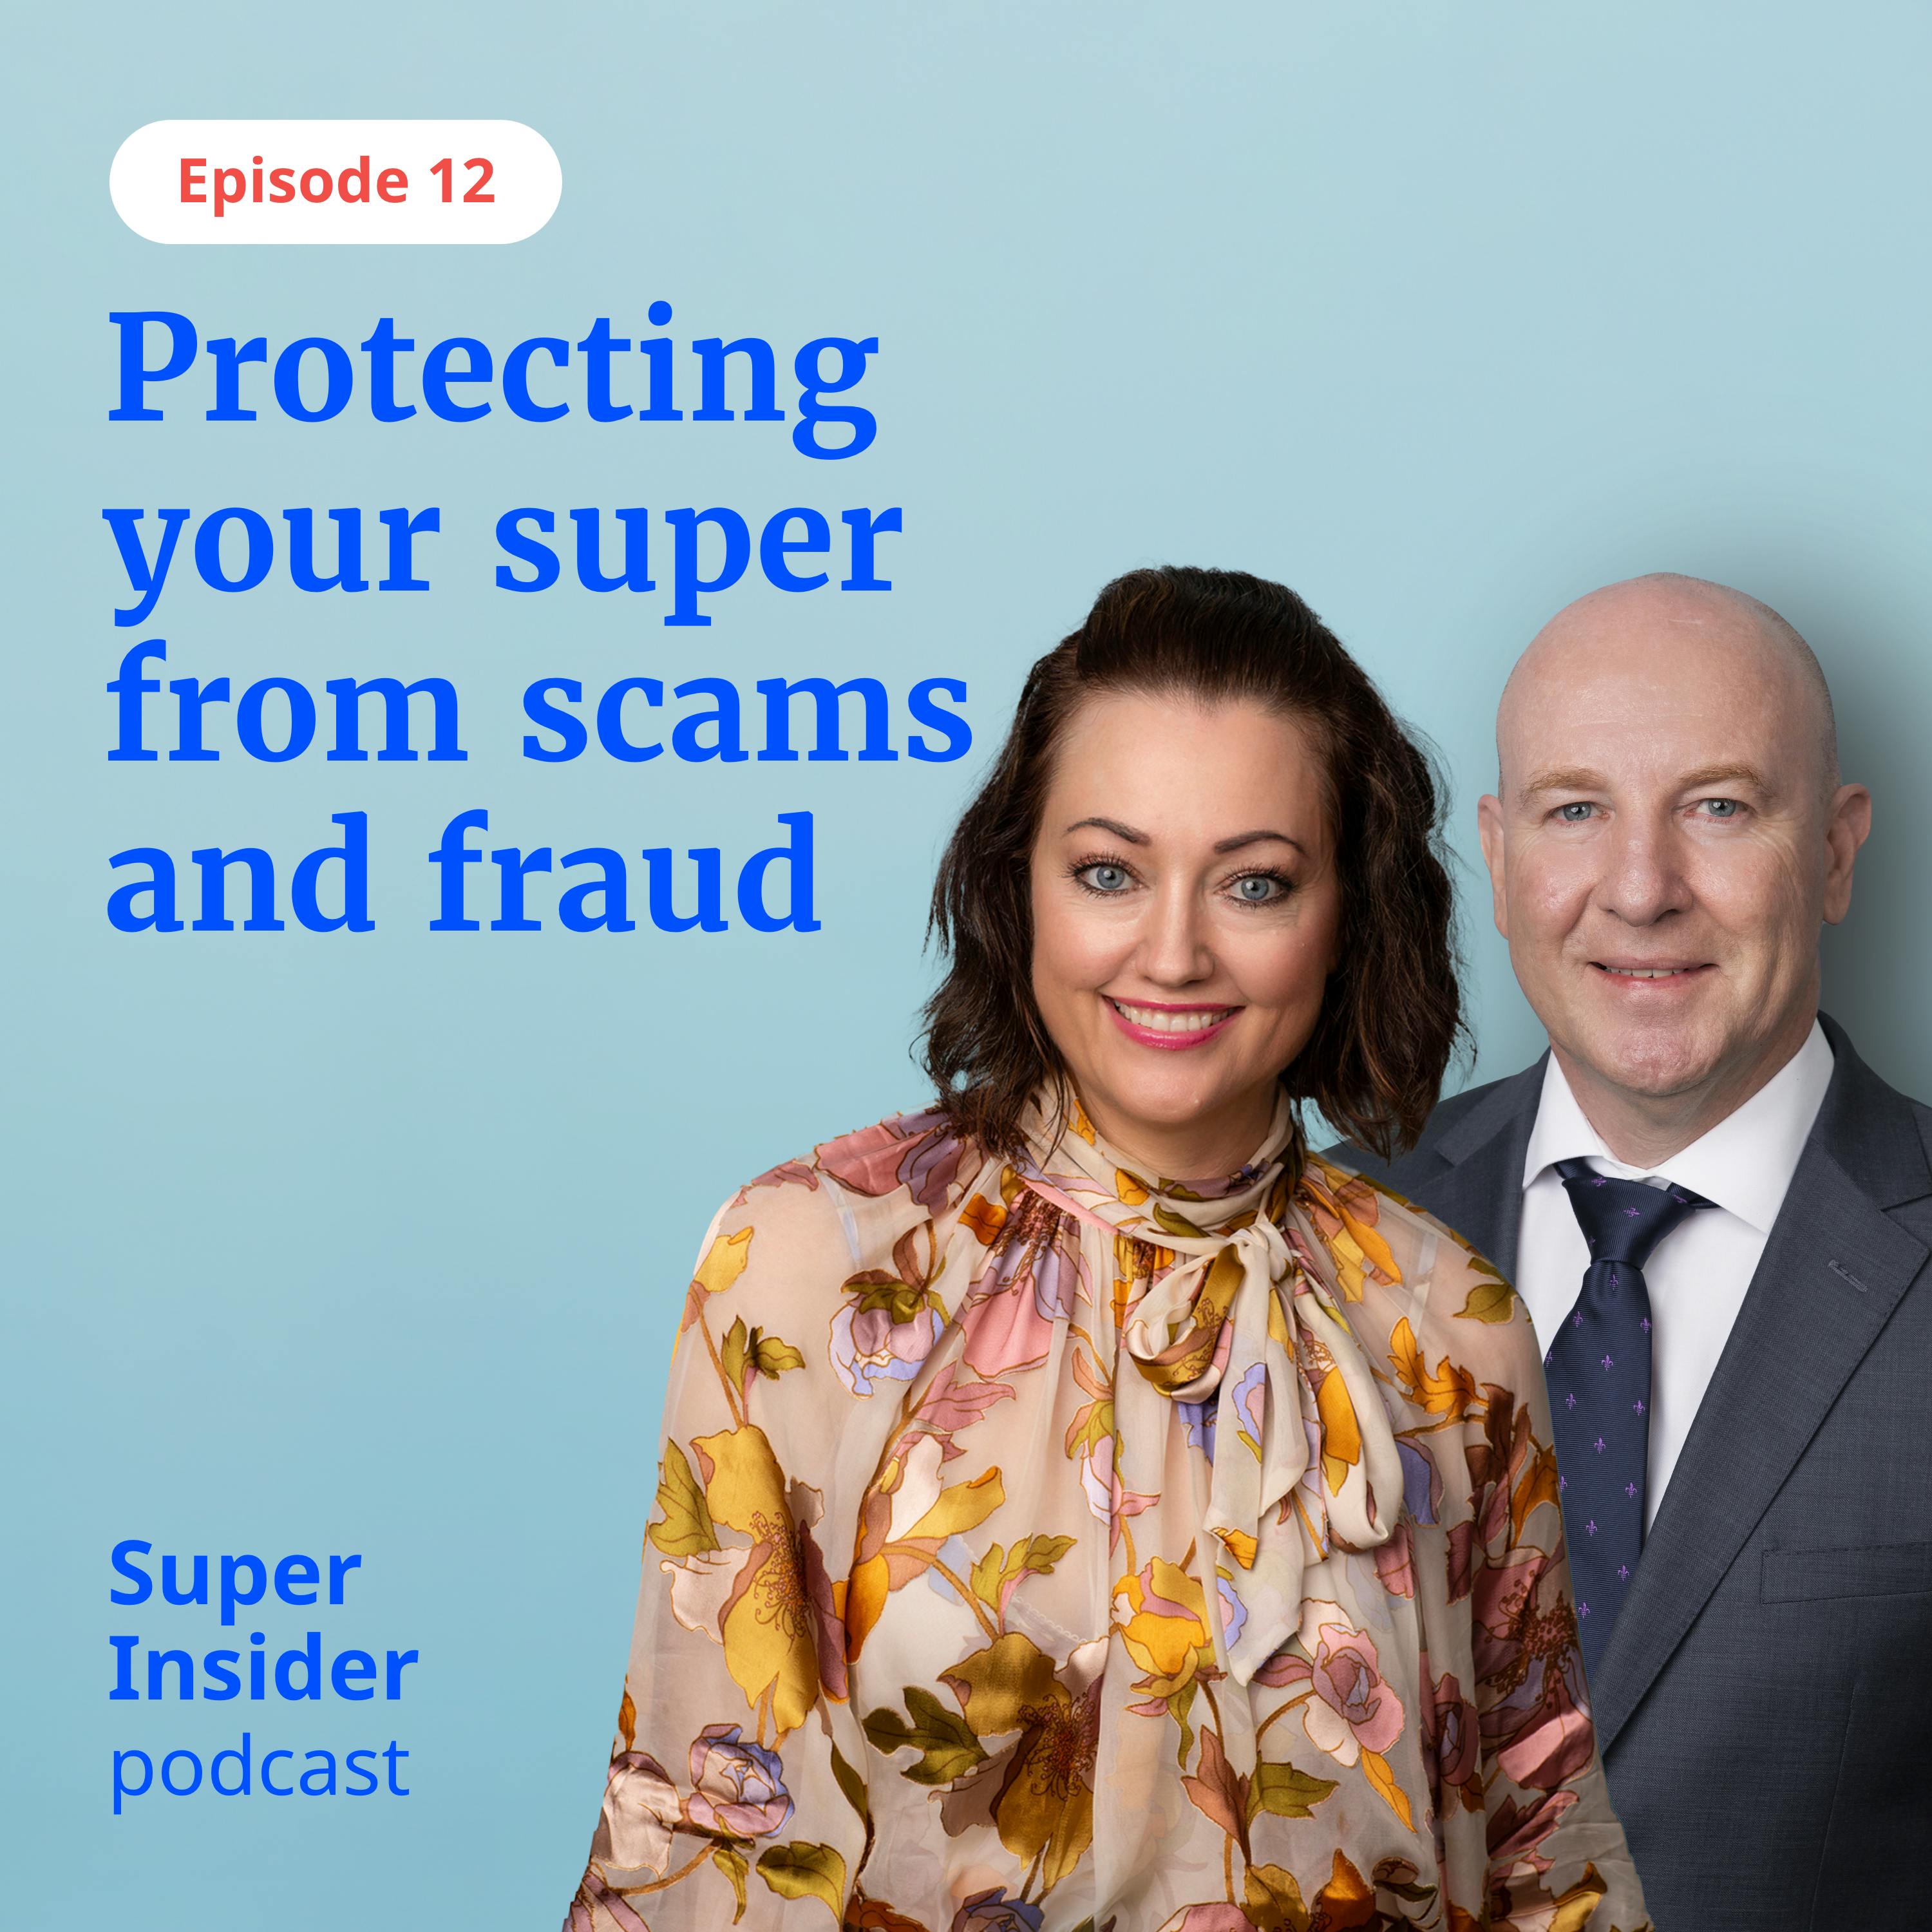 Protecting your superannuation from scams and fraud